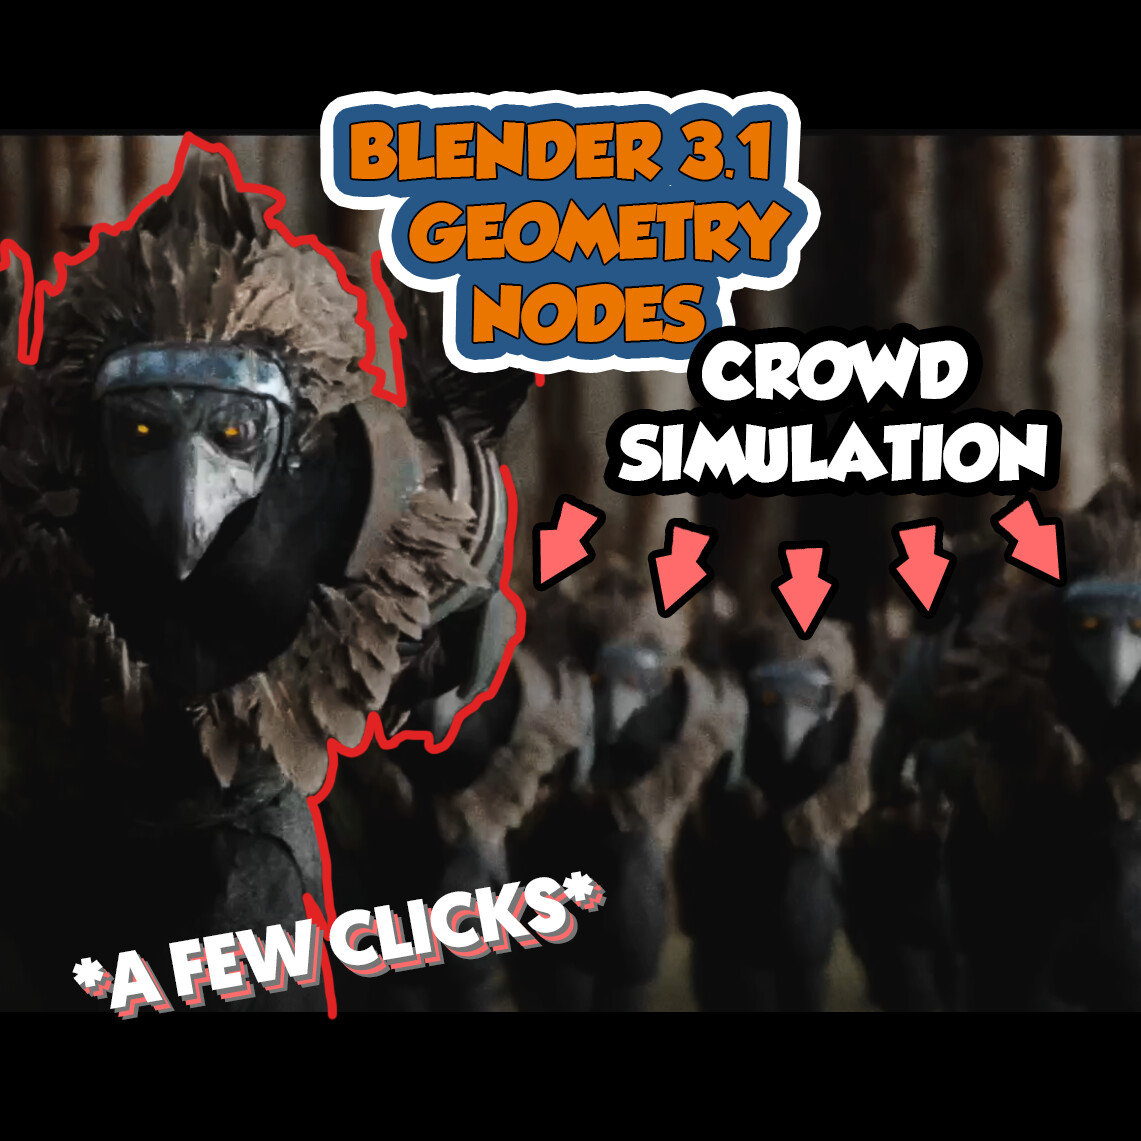 Crowd Simulation seconds with Blender 3.1 Geometry nodes